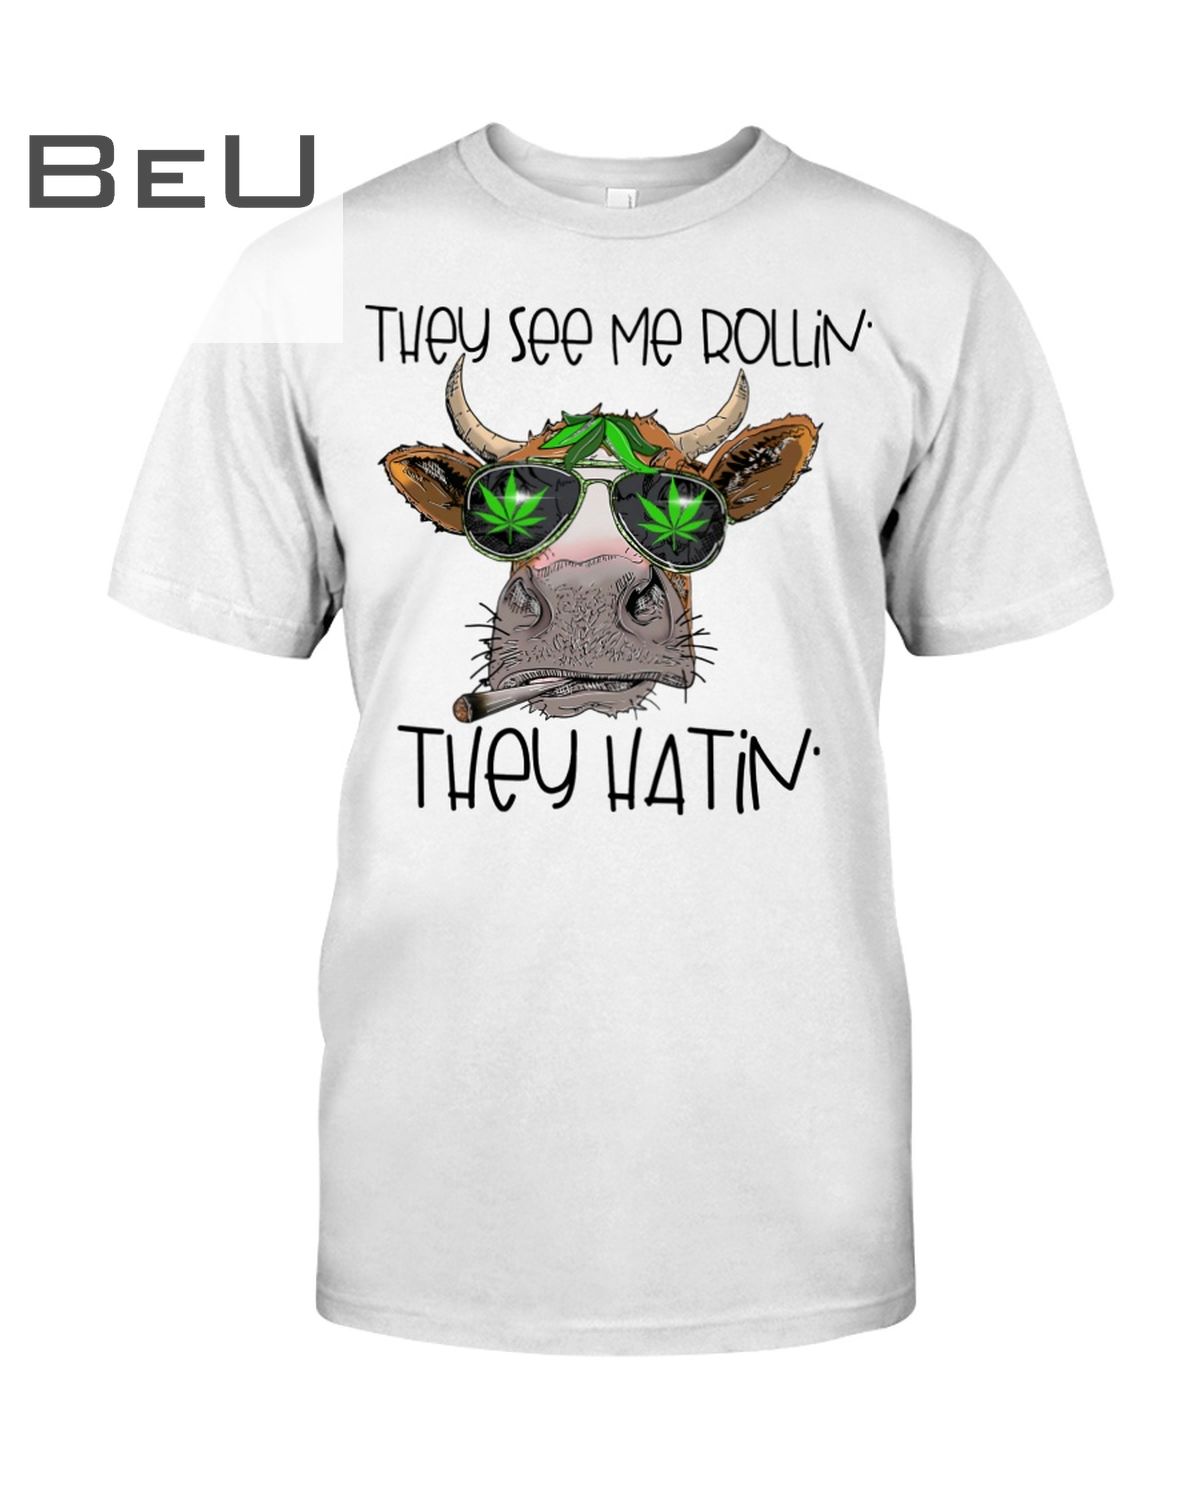 Cow Weed The See Me Rollin They Hatin Shirt